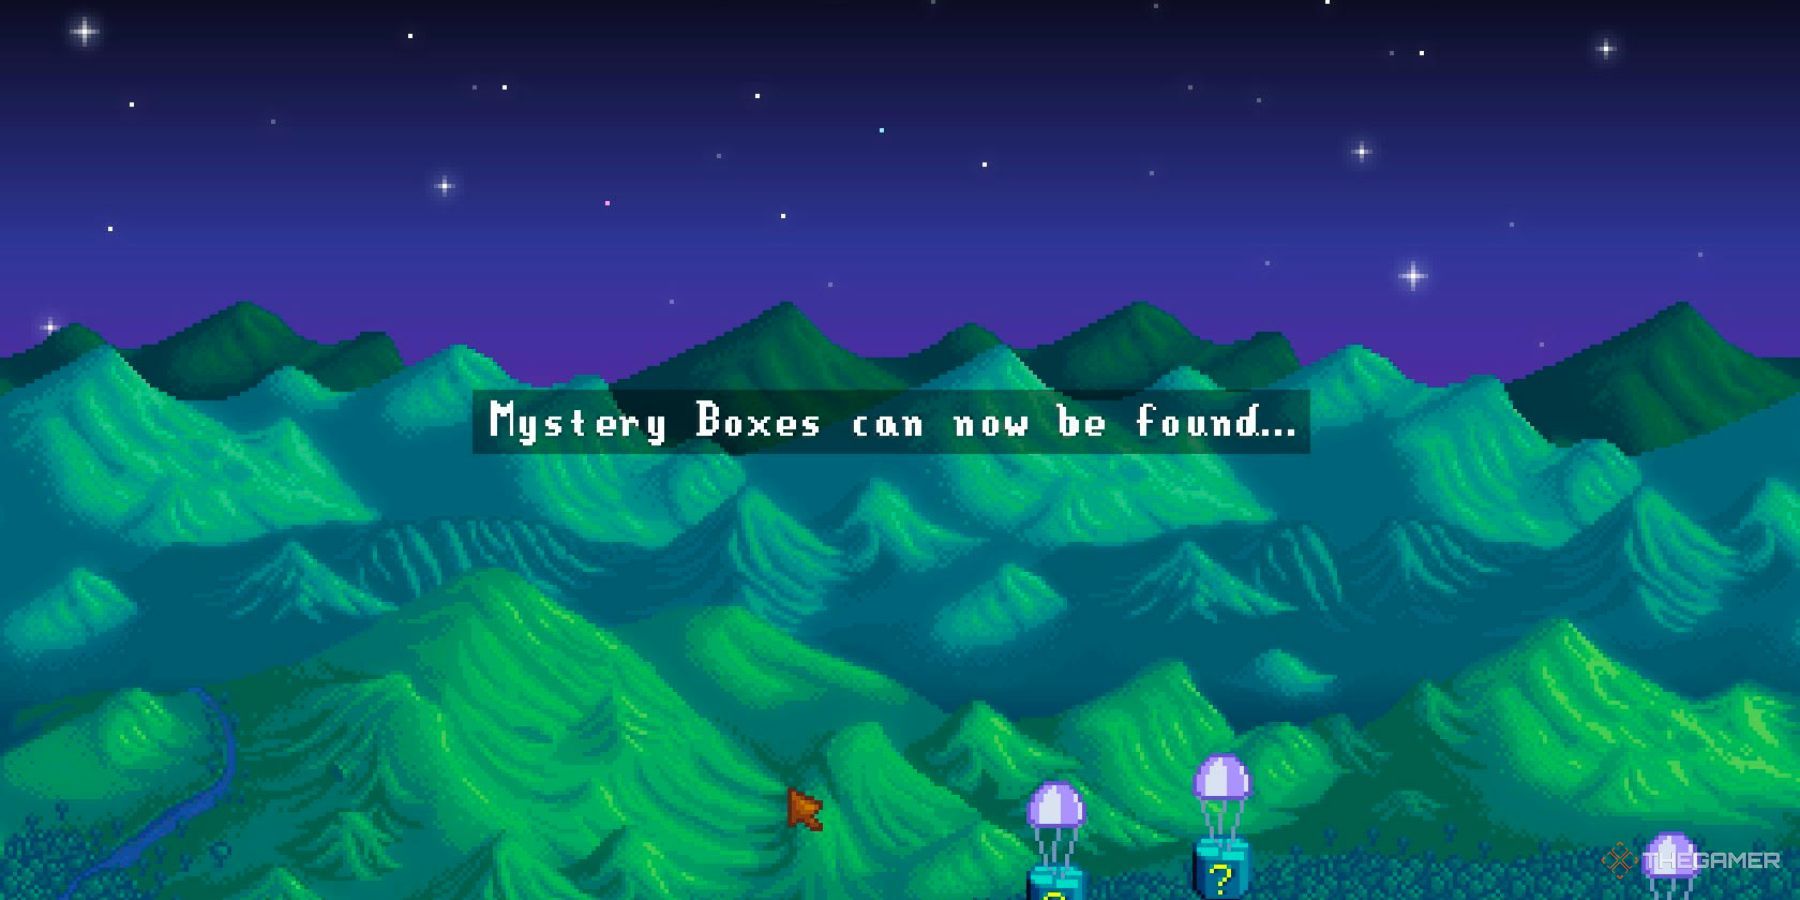 What Is The Mystery Box In Stardew Valley